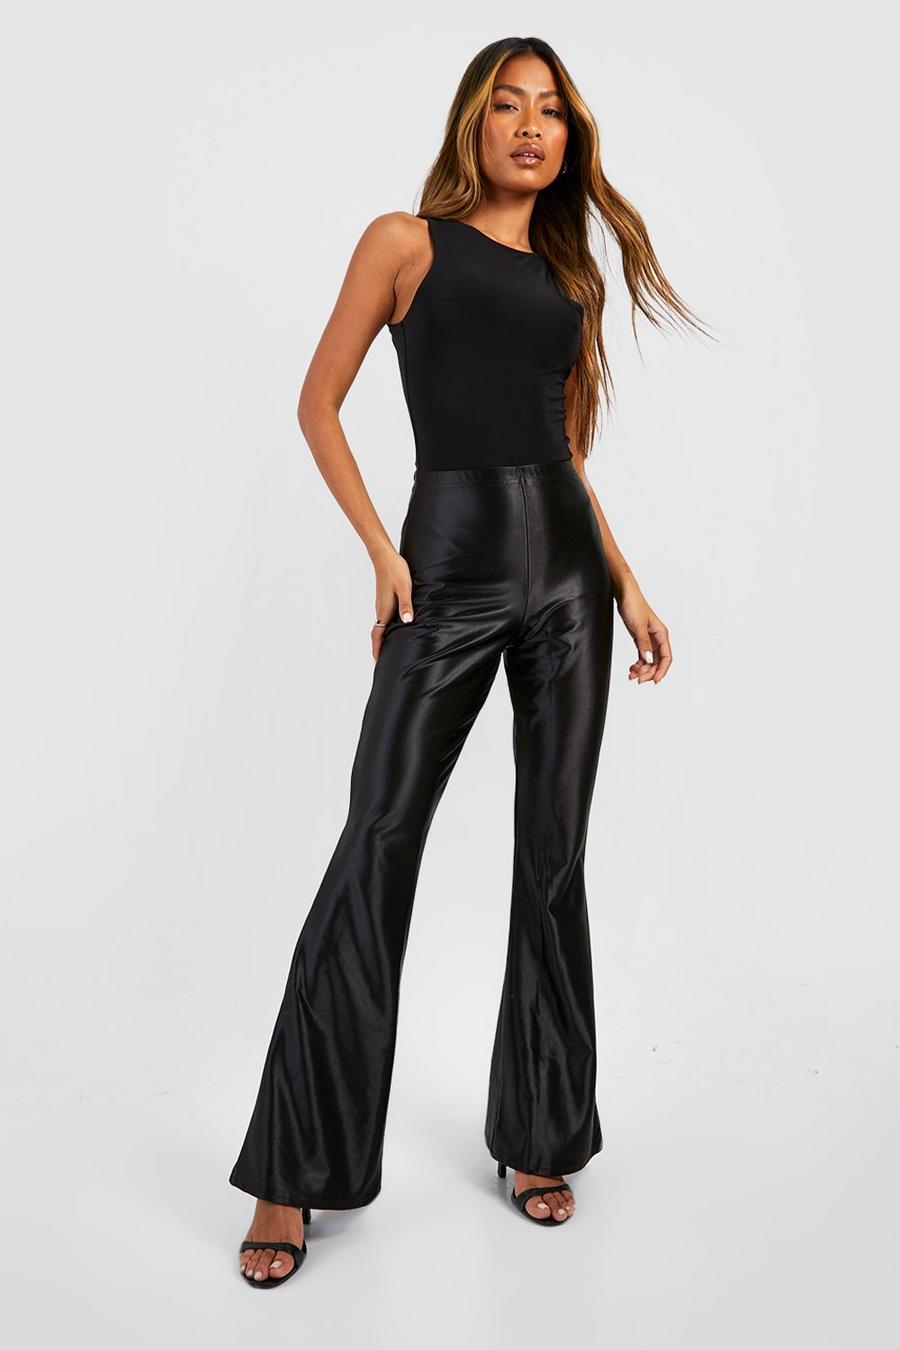 Stretch Satin Fit & Flare Trousers